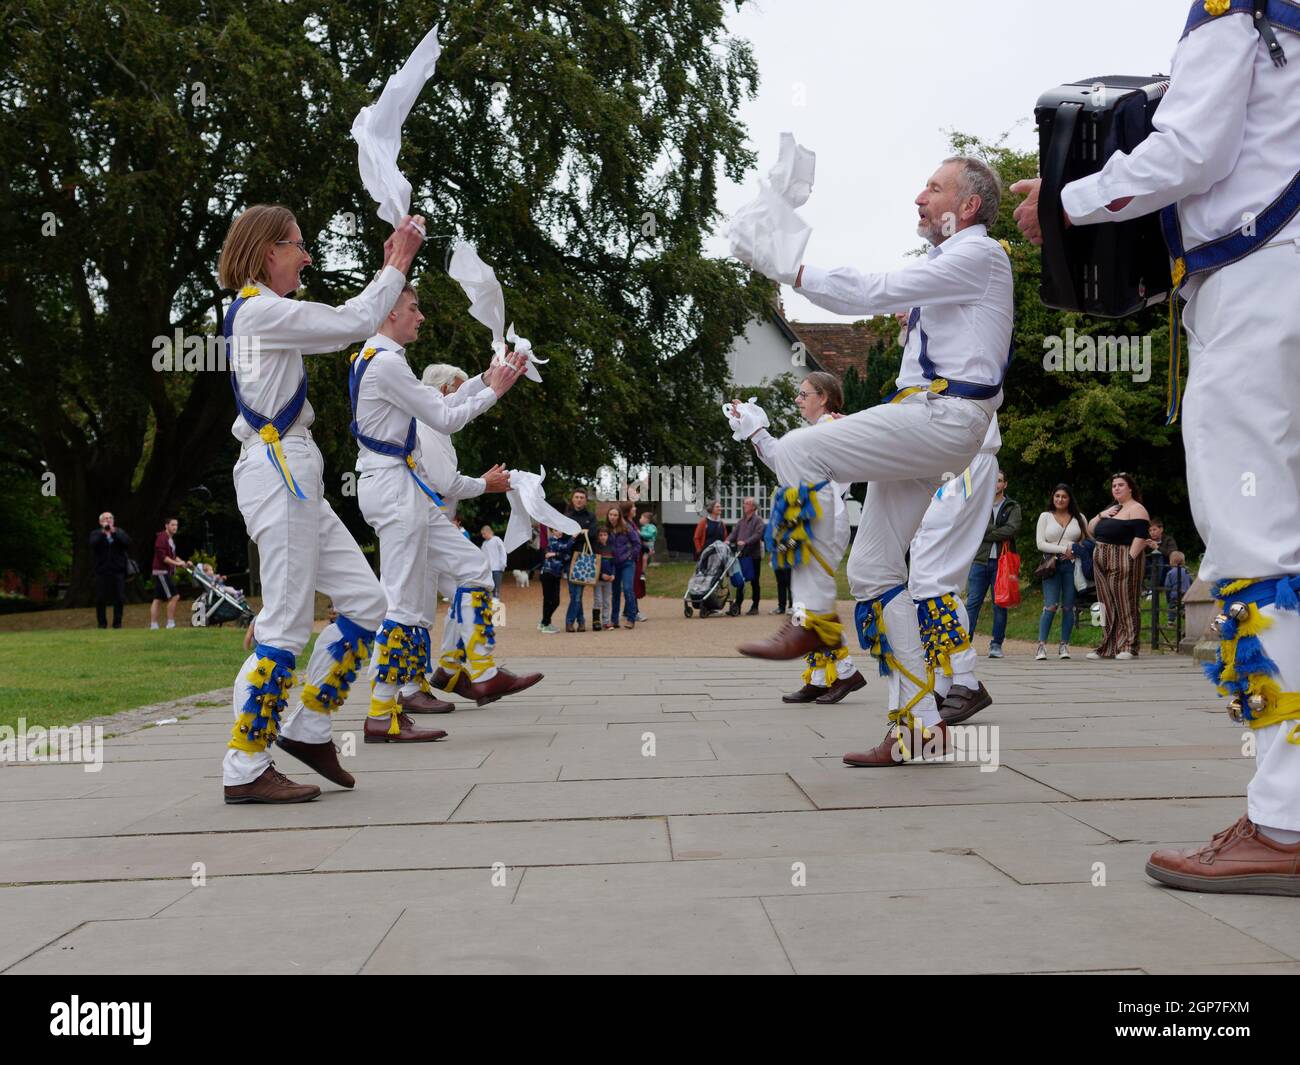 St Albans, Hertfordshire, England, September 21 2021: Morris Dancers performing in front of the Cathedral. Stock Photo